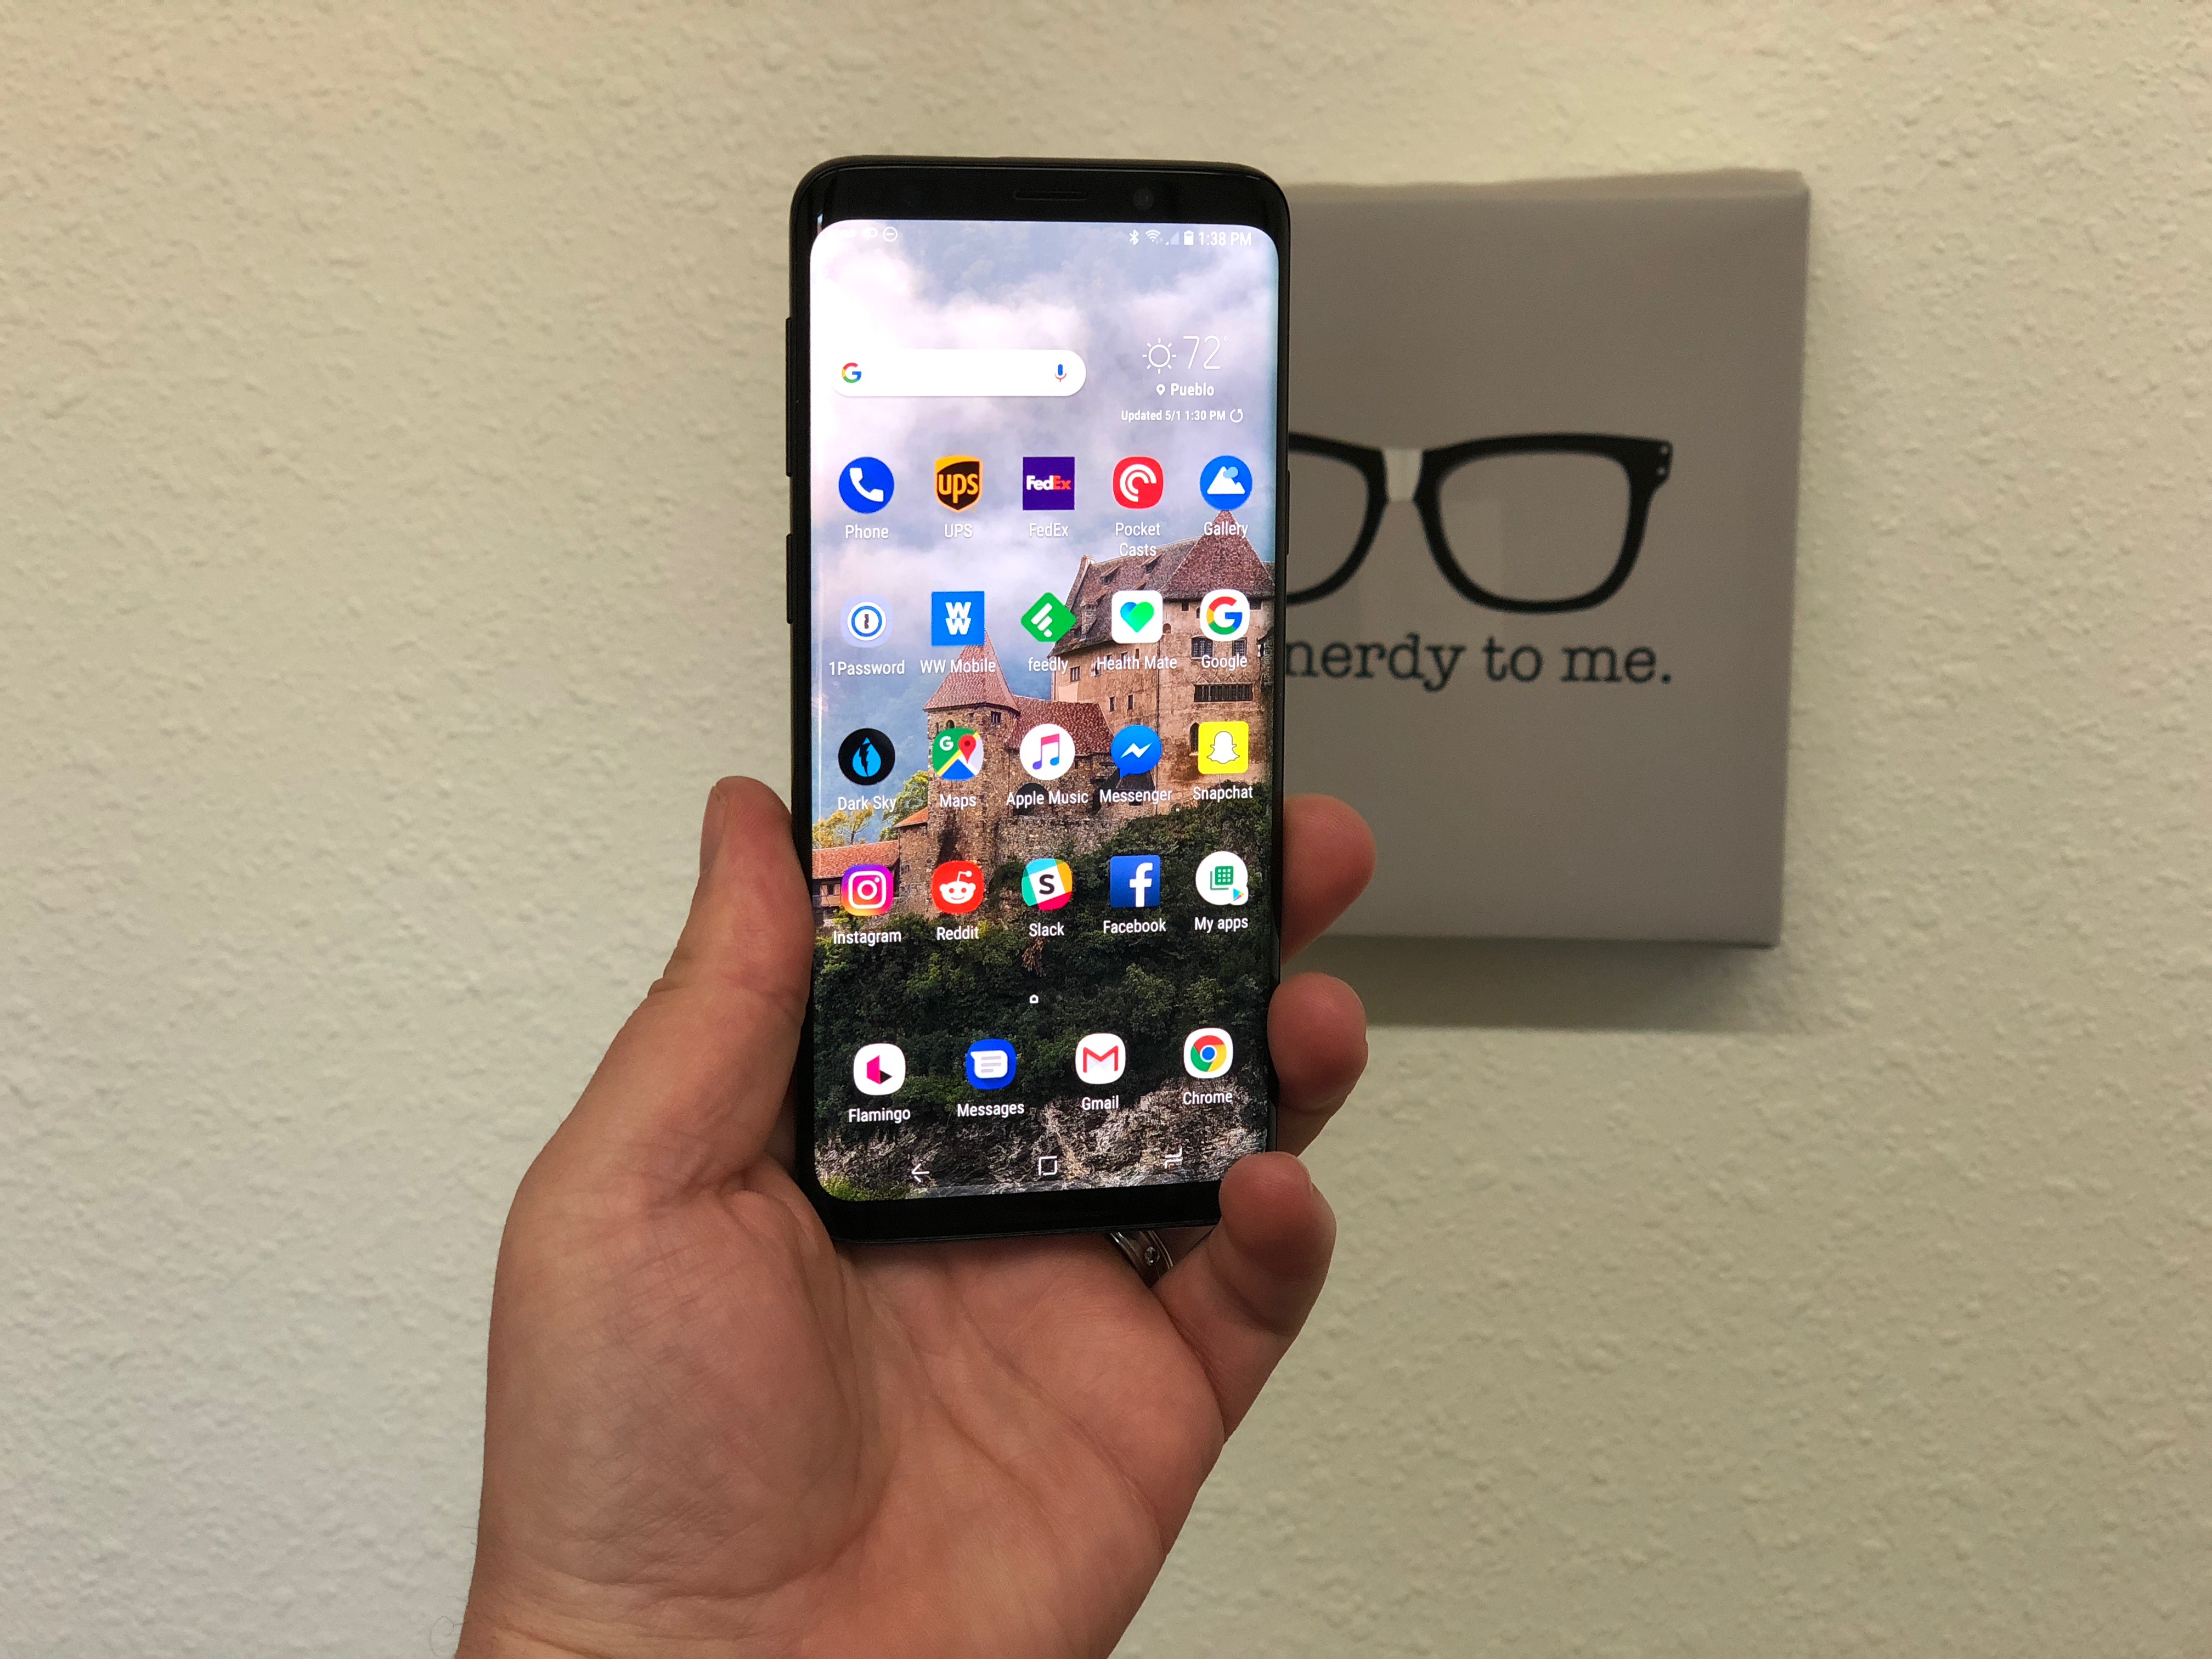 Samsung Galaxy S9 review – it's on sale today, but should you buy